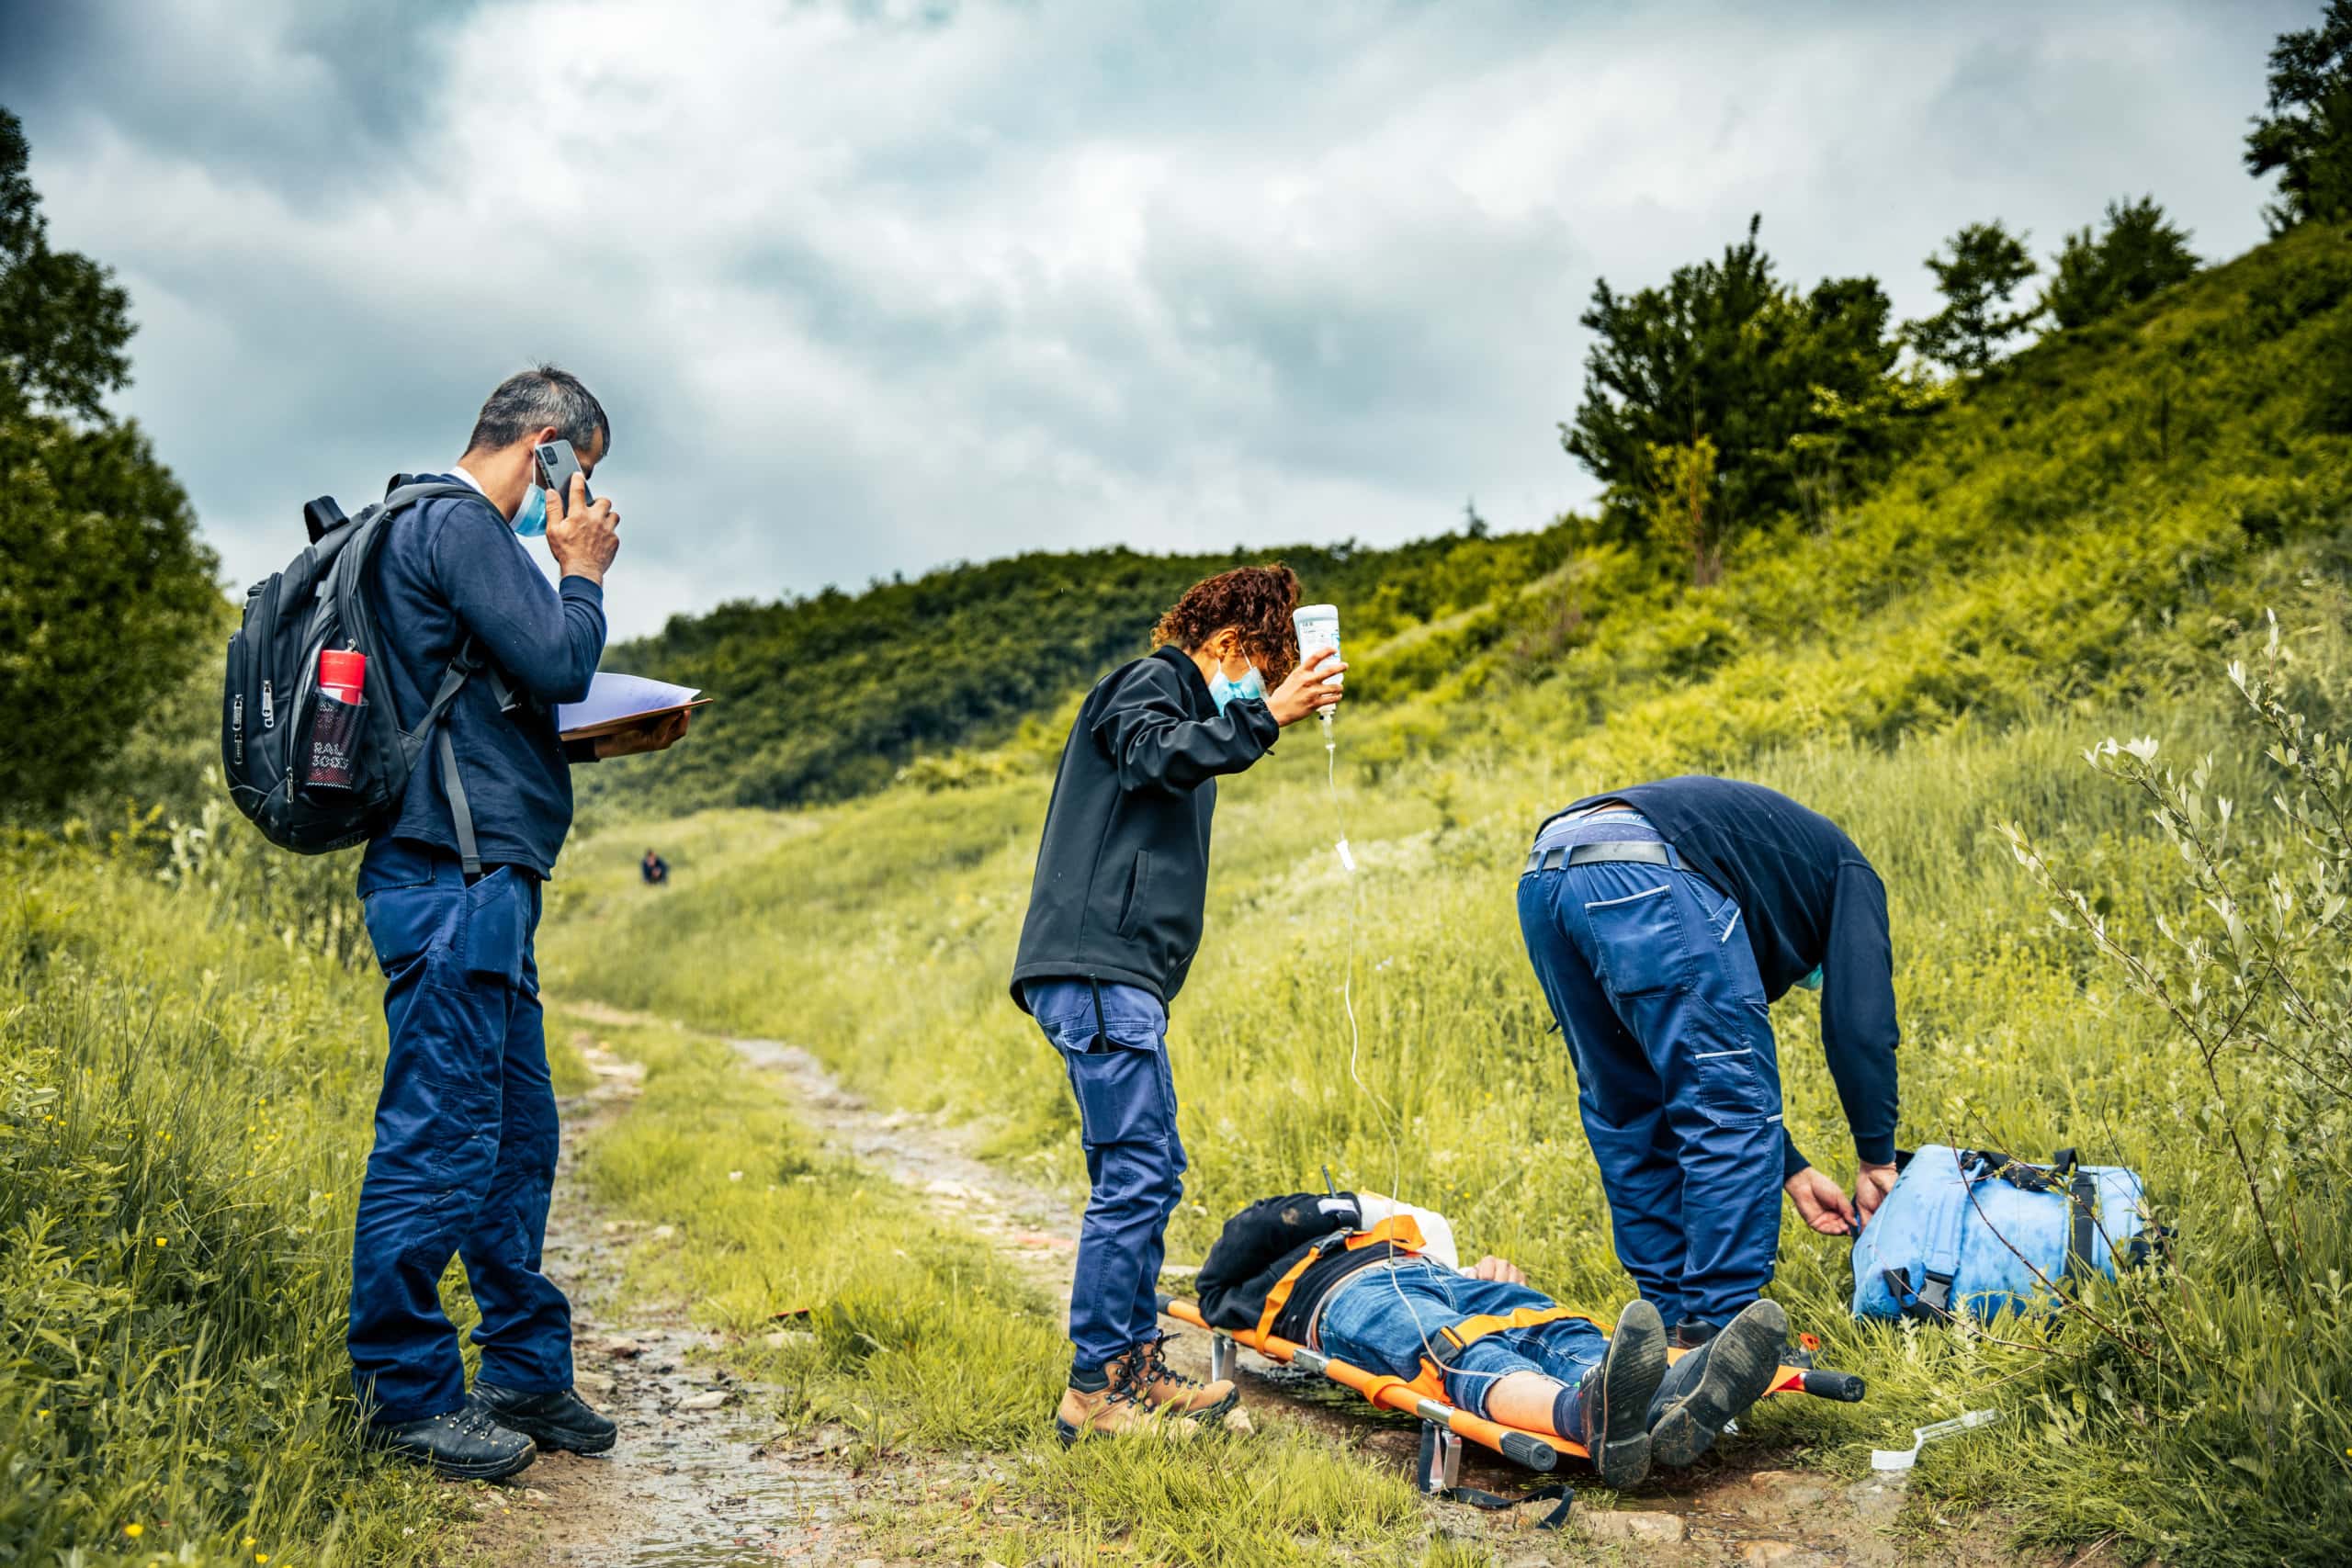 Casualty extraction exercise in the outdoors